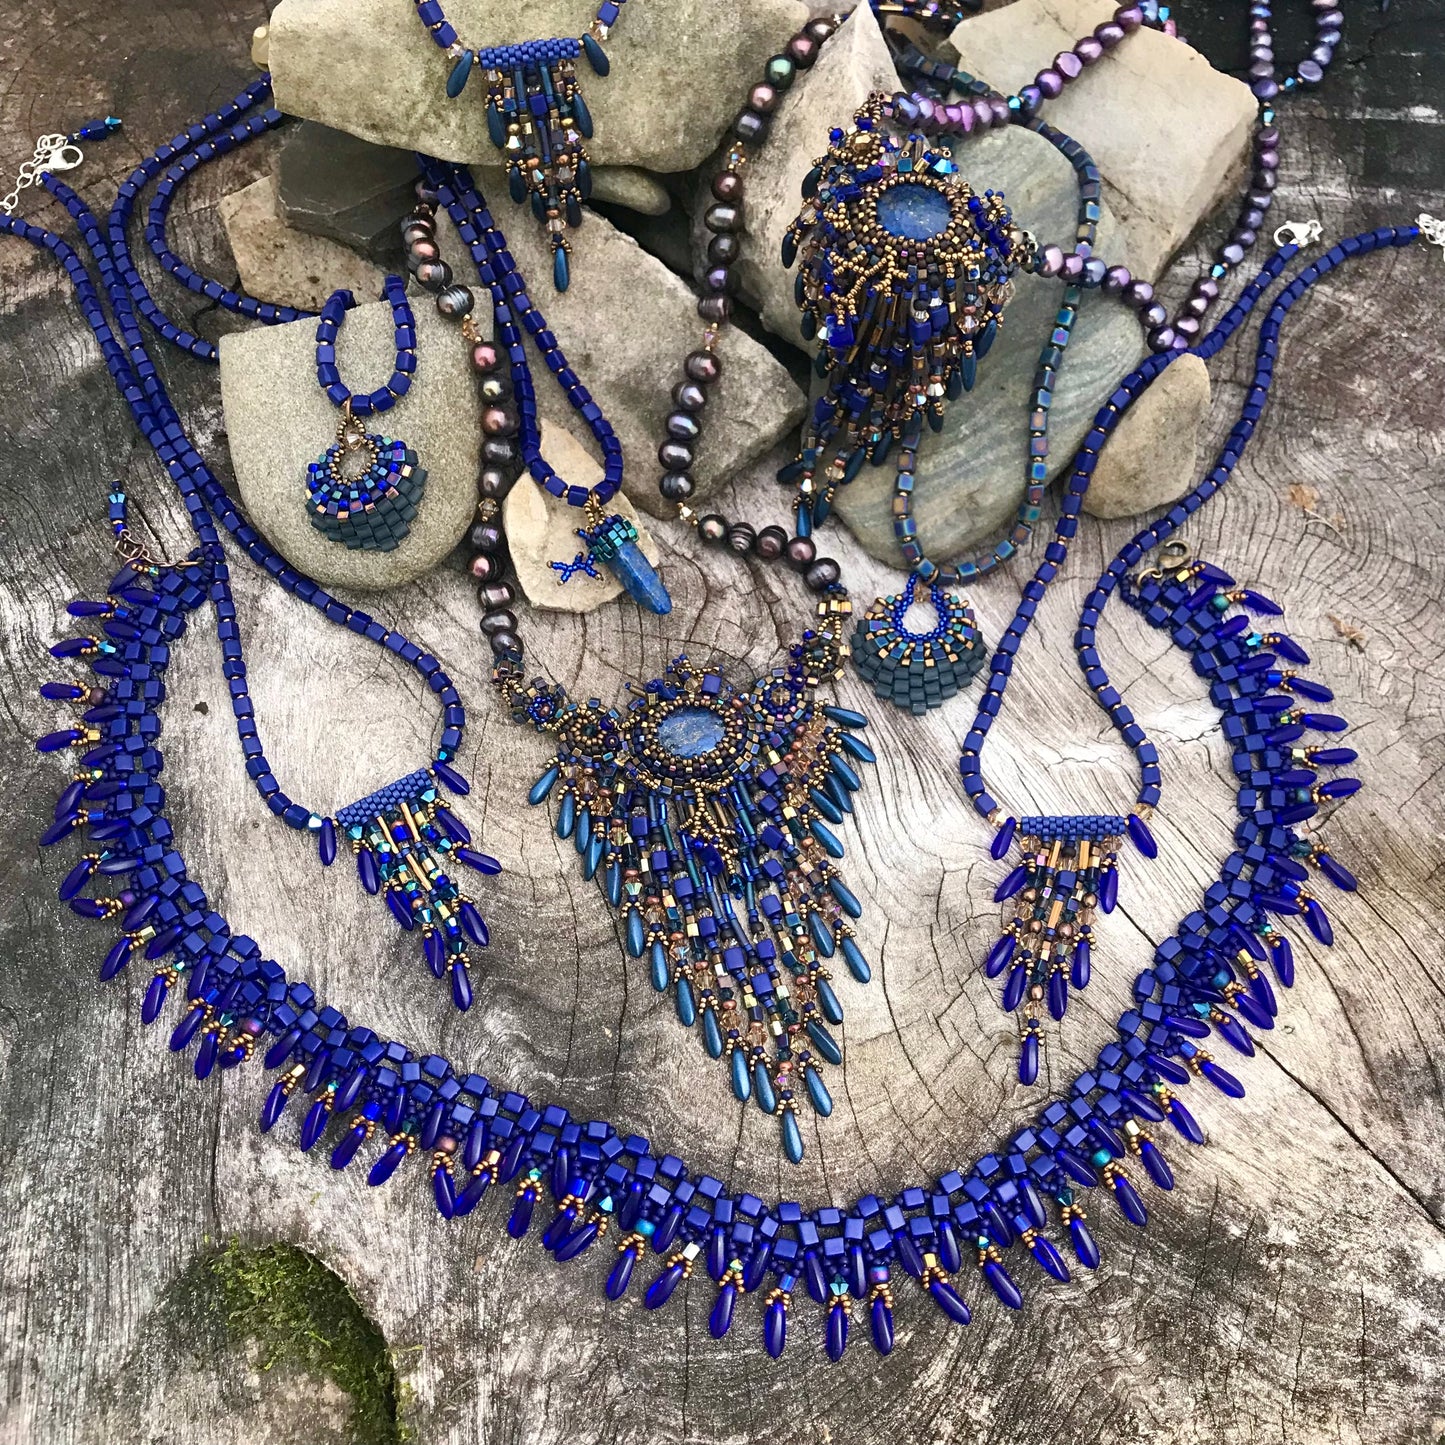 Cobalt with Blue Crystal Fringy Necklace - 7 strands